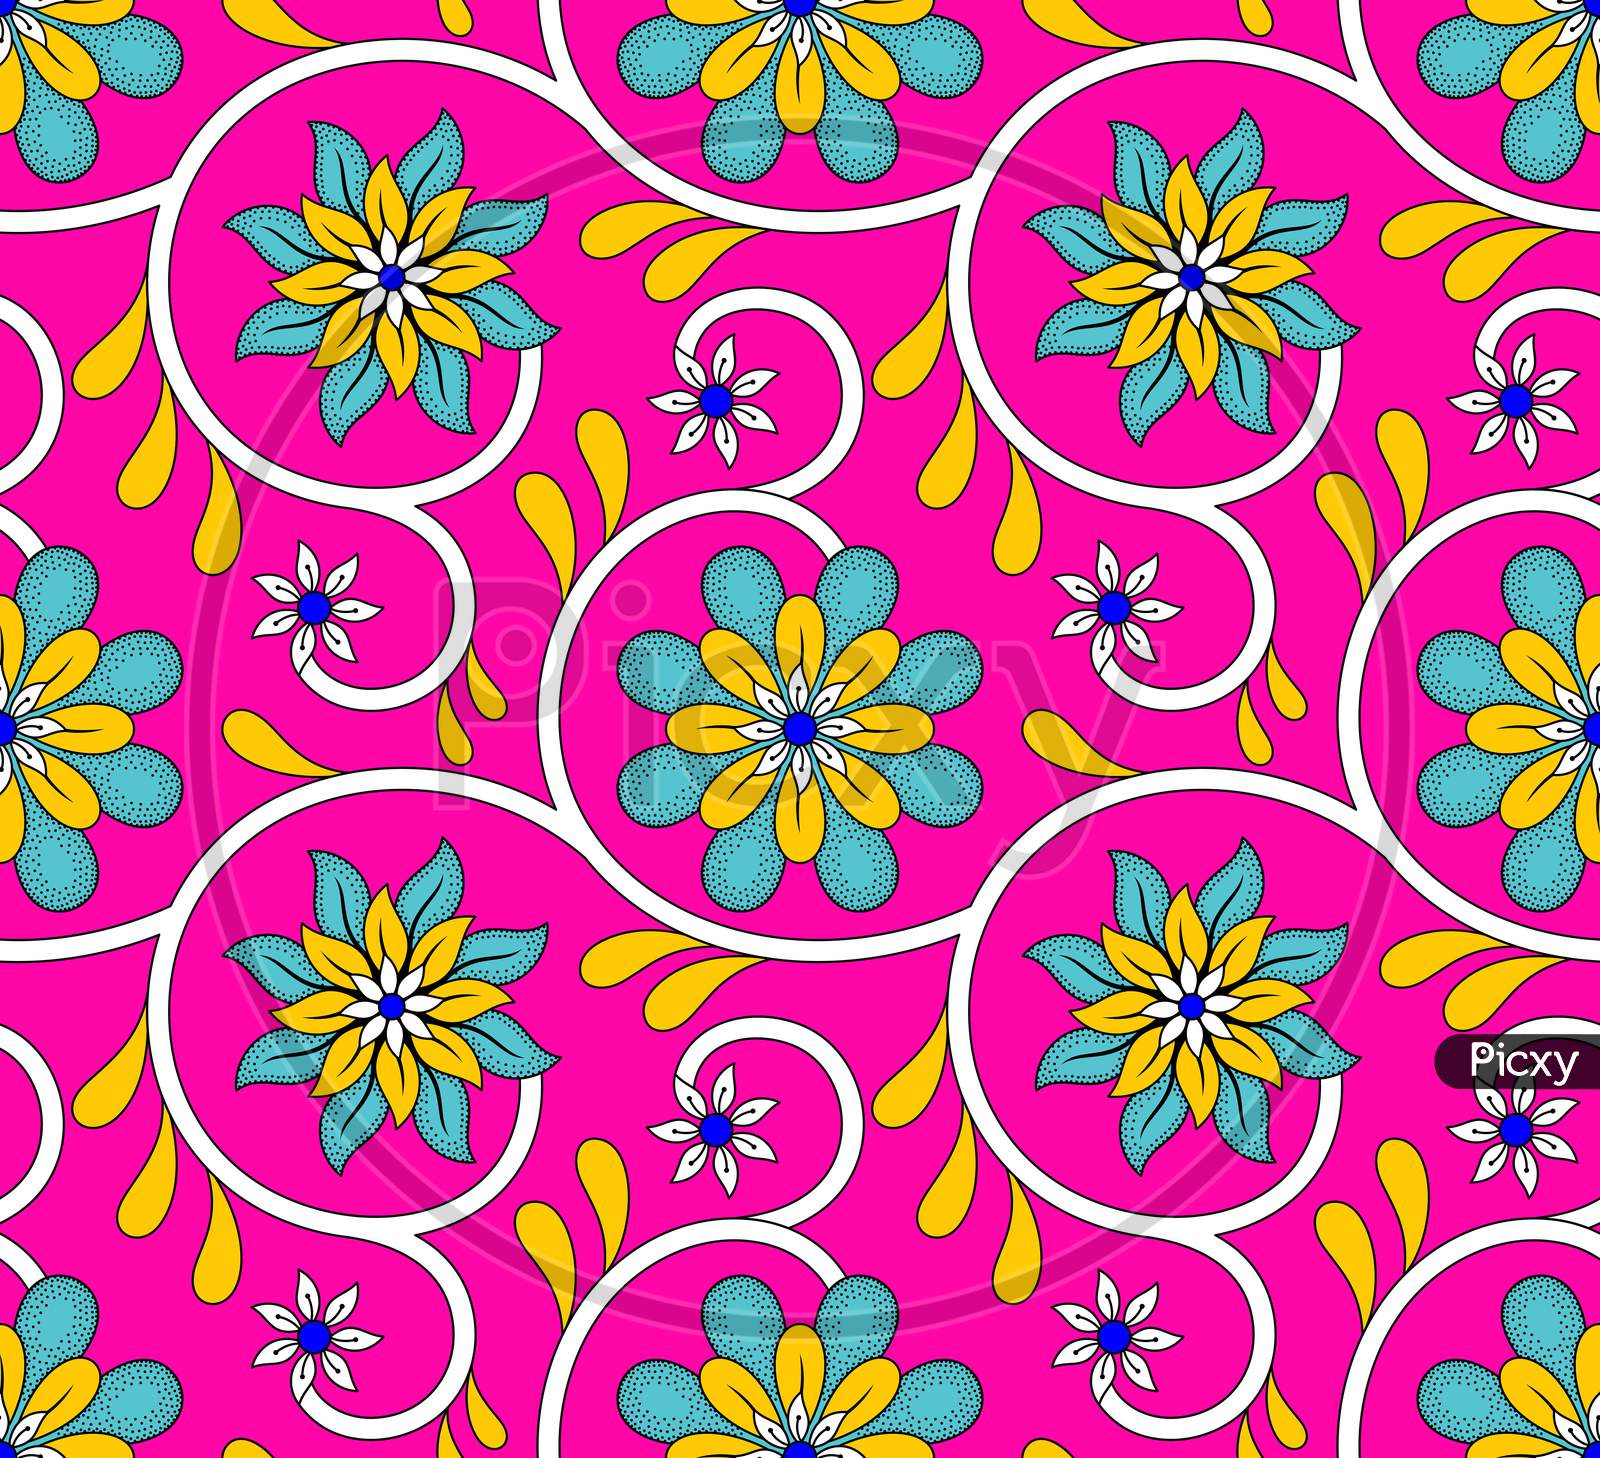 Image of Colorful Vector Seamless Floral Pattern With Flowers-CN157123-Picxy